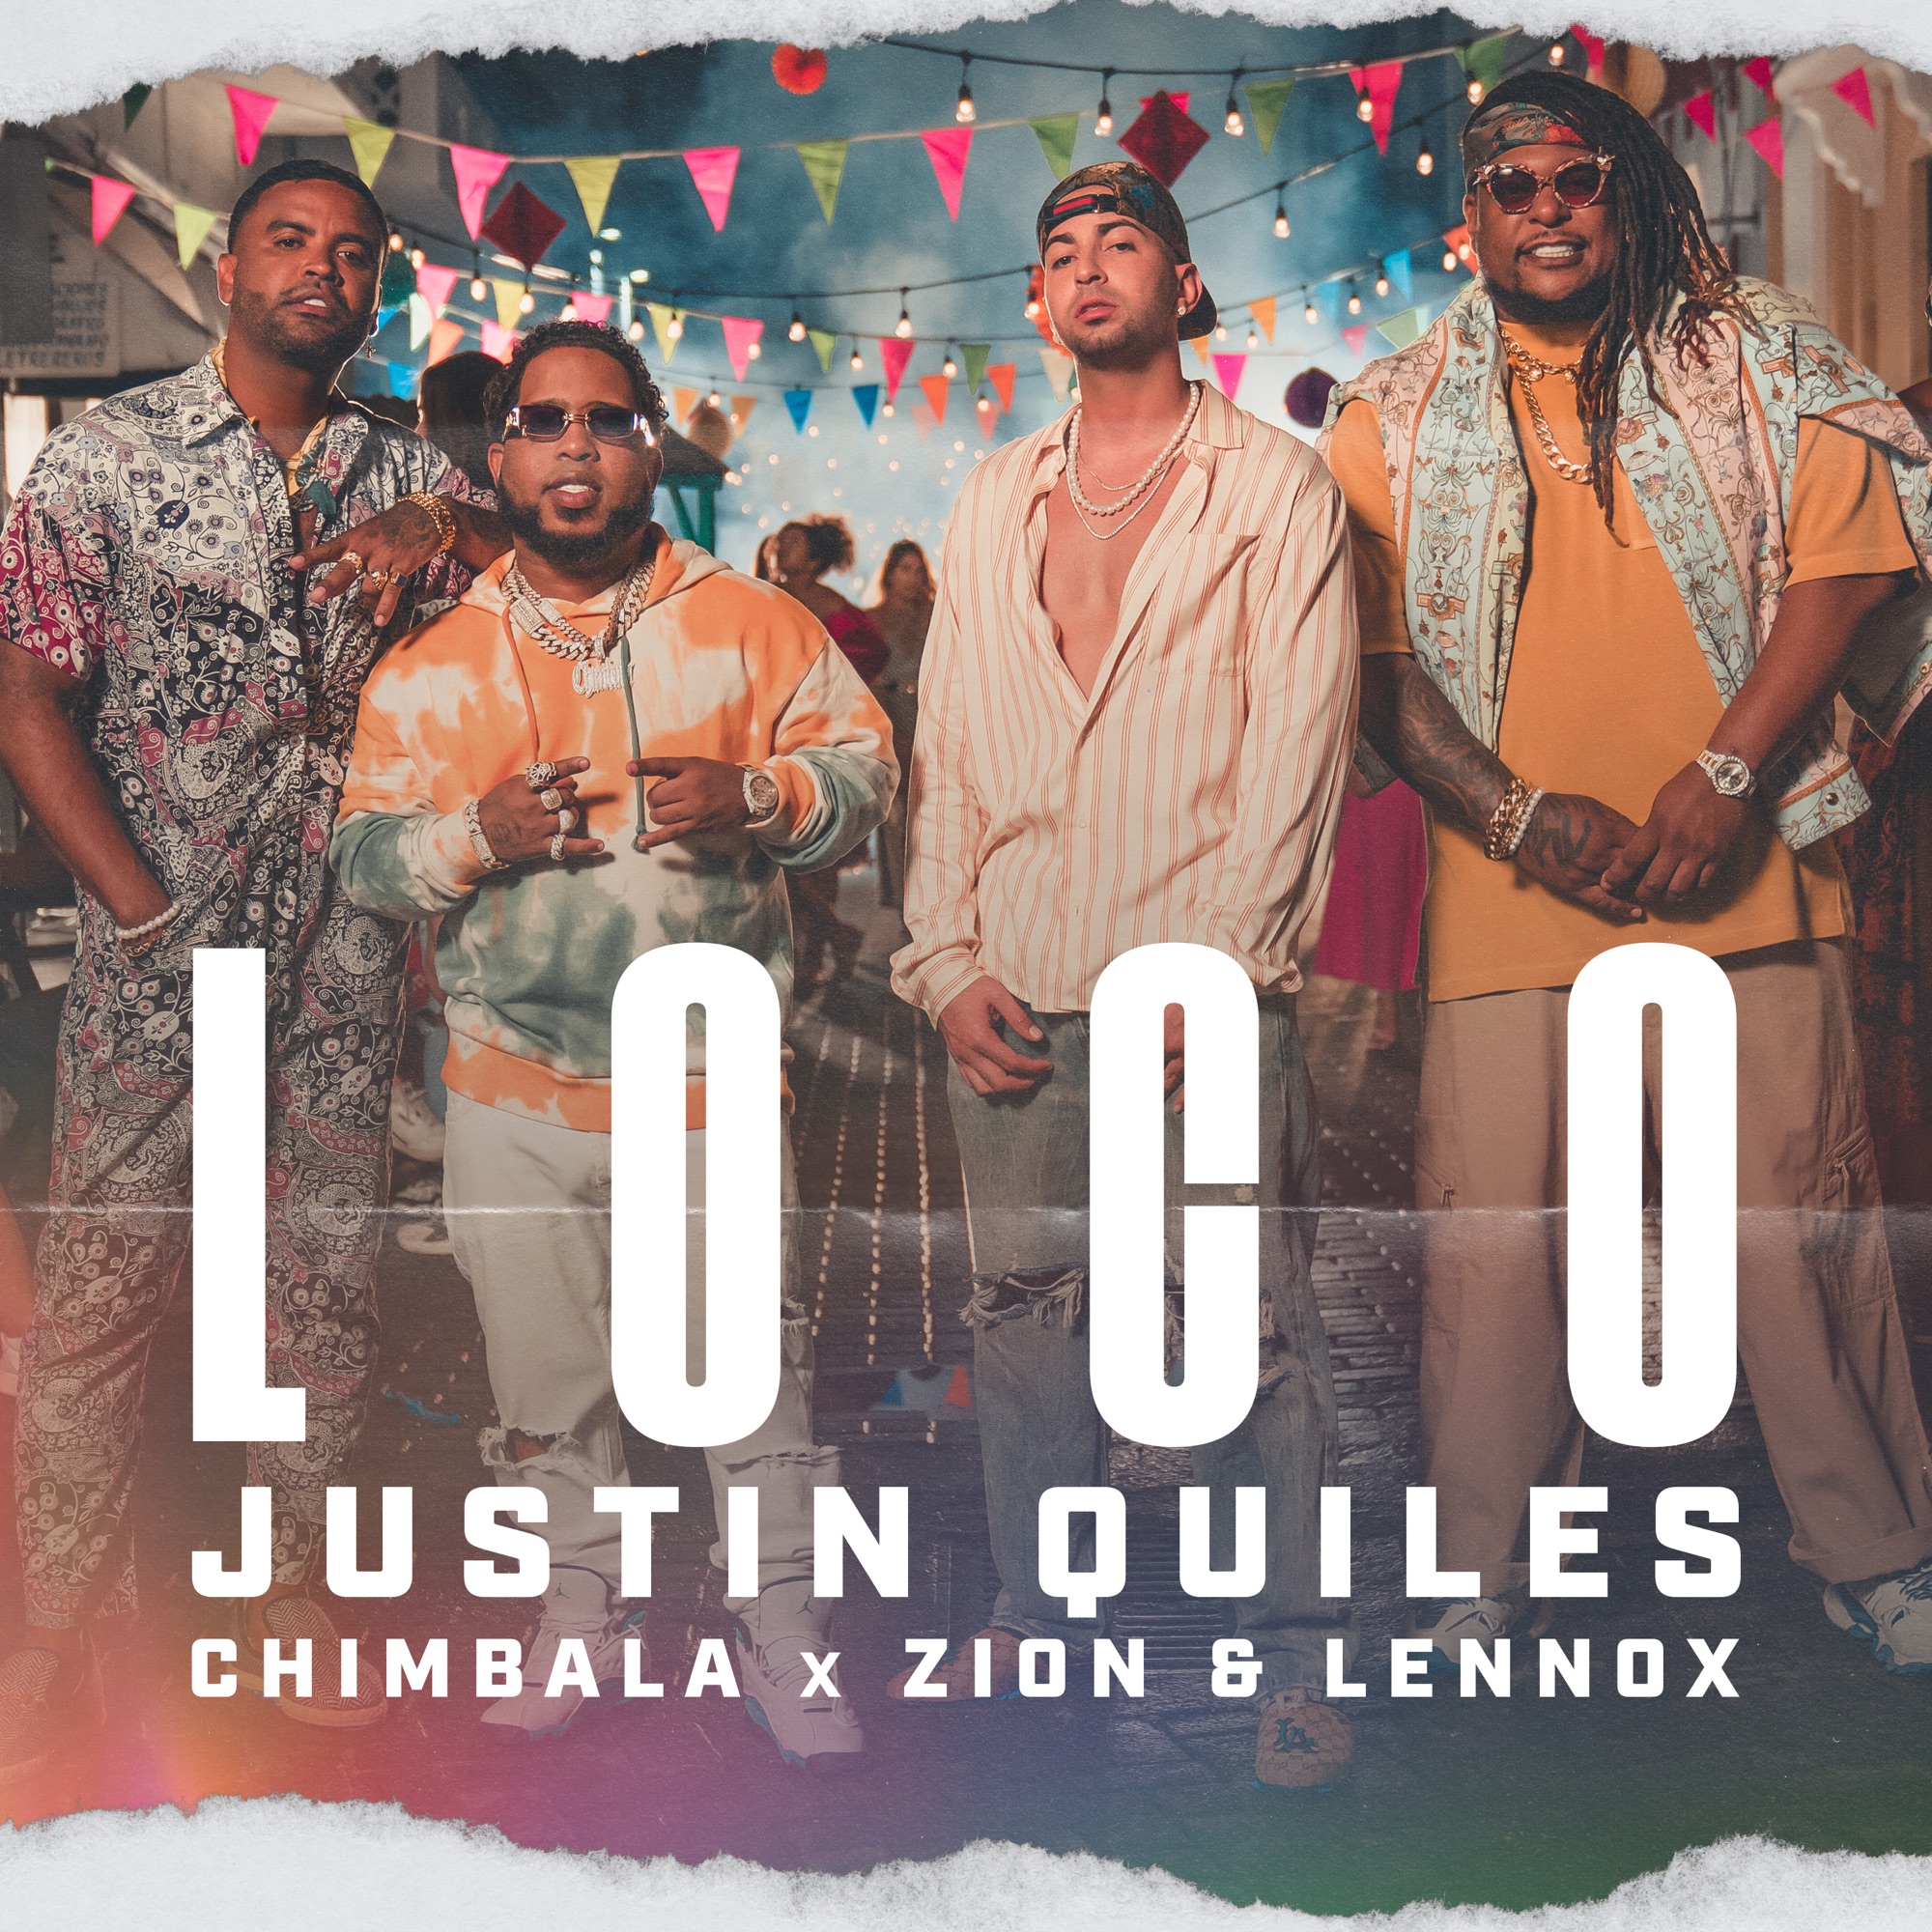 Justin Quiles Ft. Chimbala y Zion y Lennox - Loco.mp3